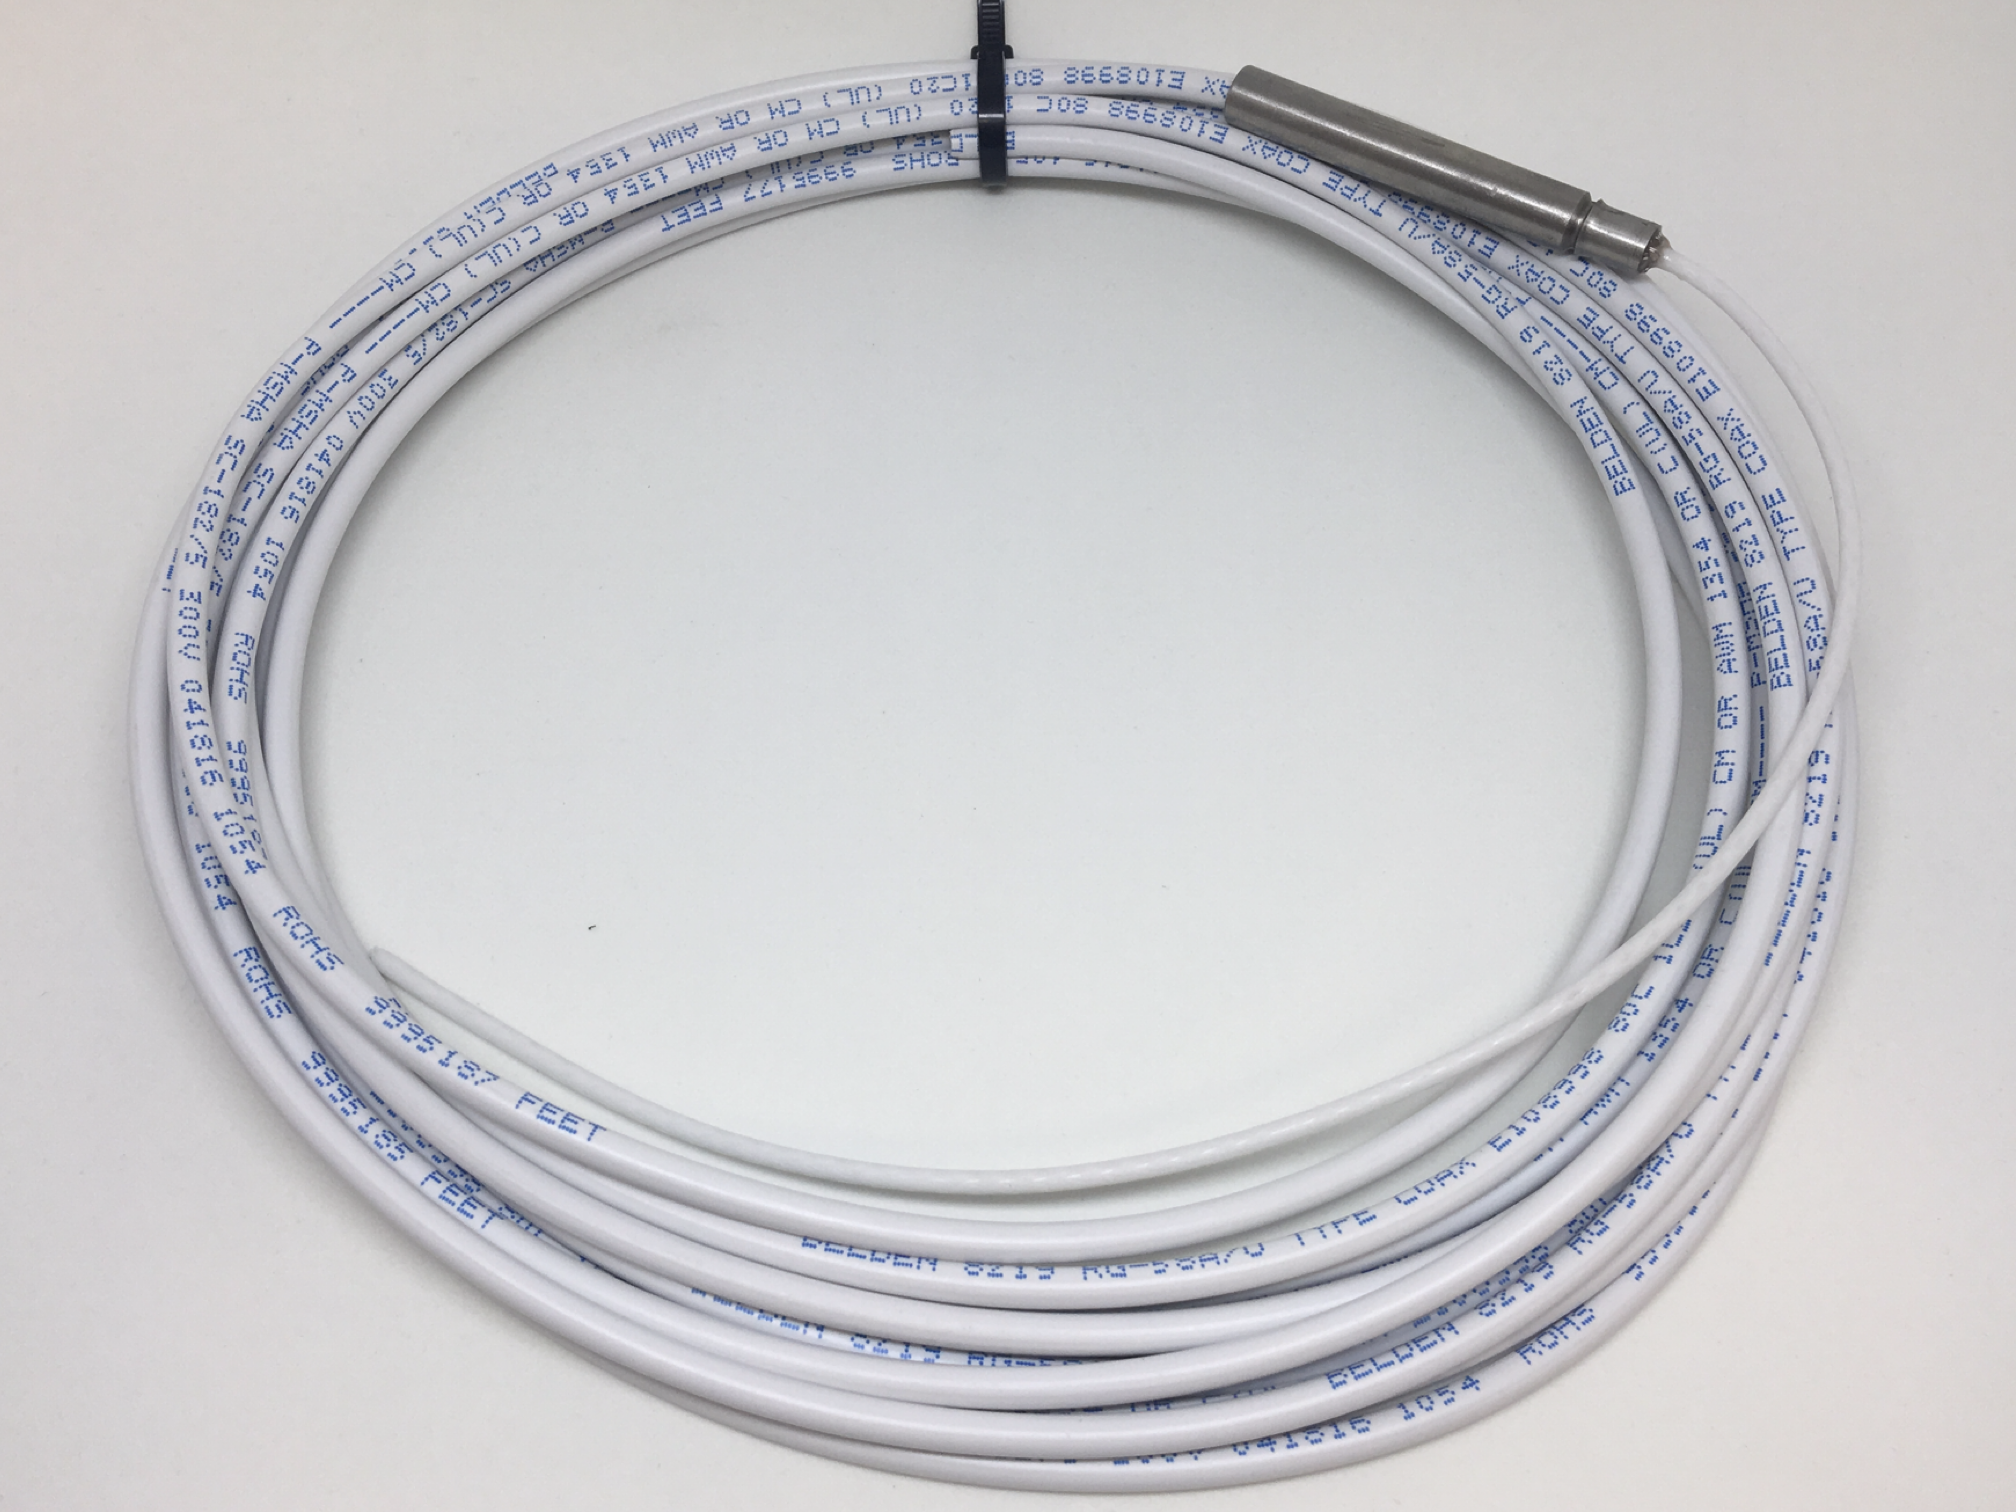 22 ft. cable for CB Antennas - marine antenna - antennas for boats